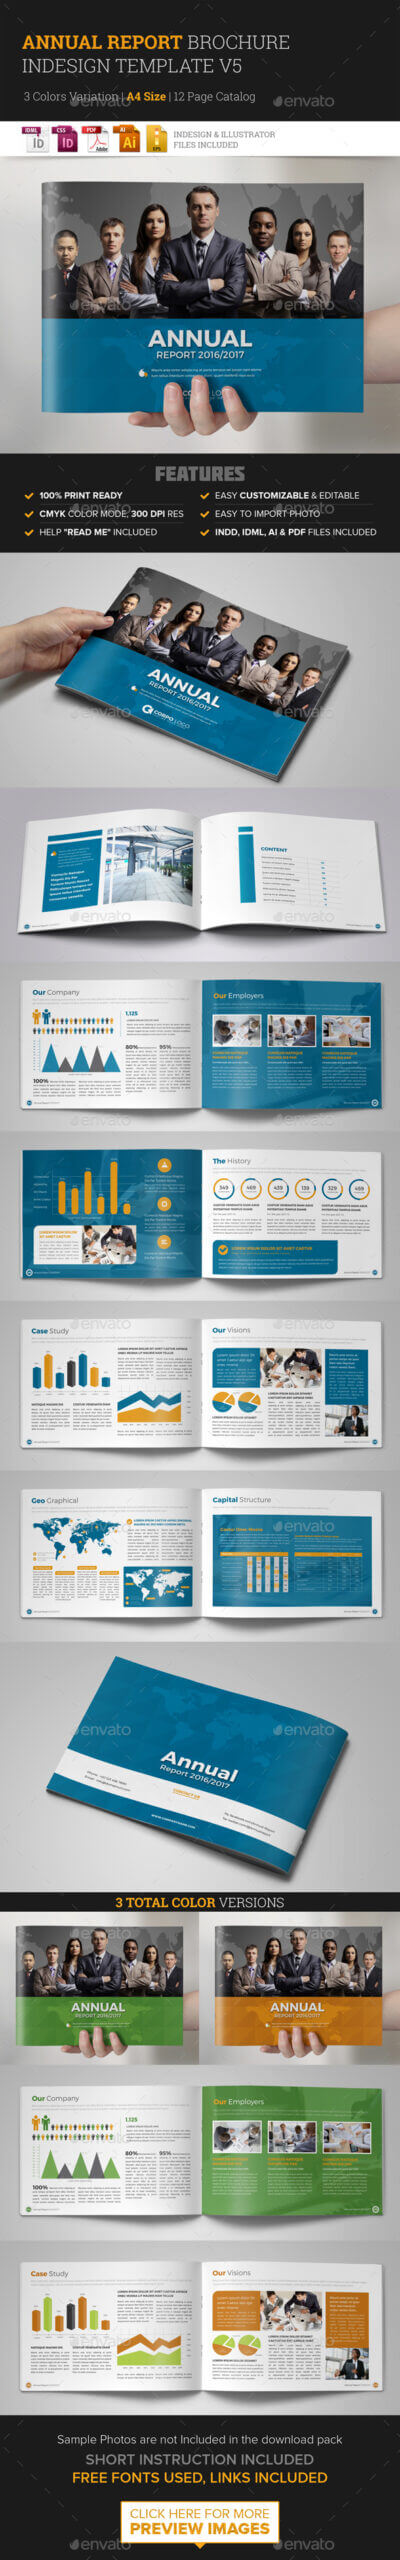 Annual Report Template Indesign Graphics, Designs & Templates With Regard To Free Annual Report Template Indesign